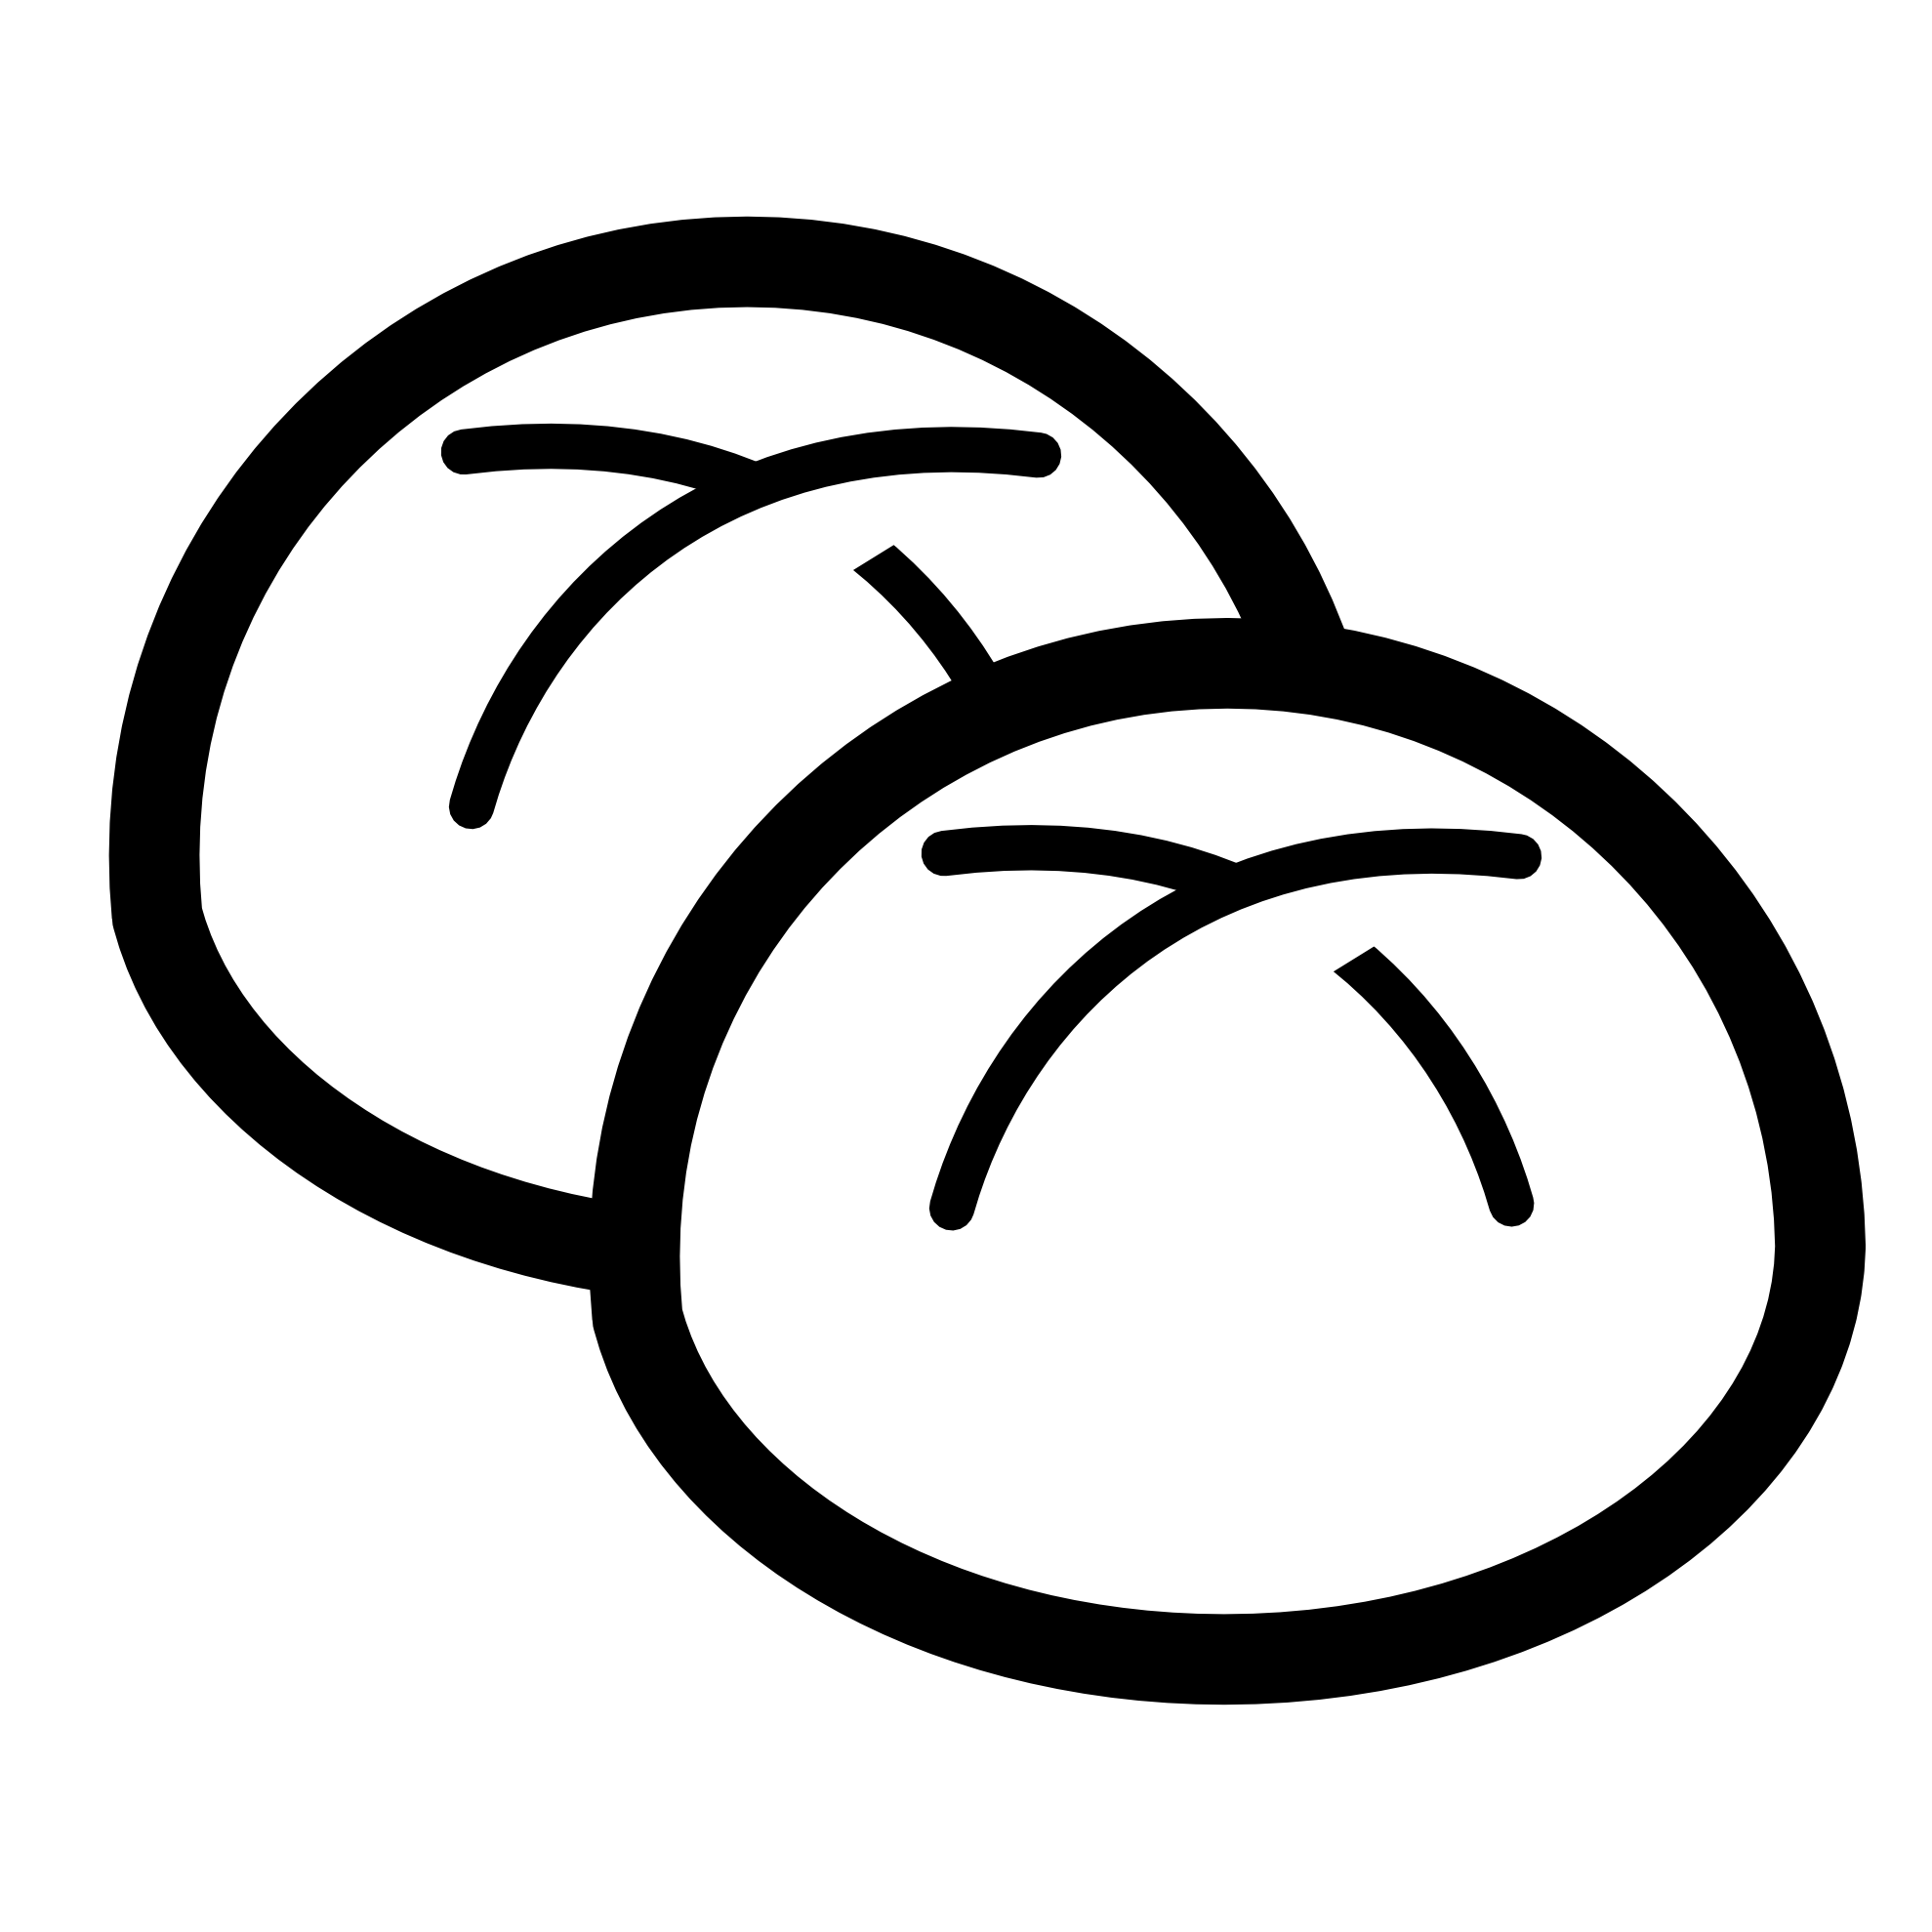 Cinnamon Roll Clipart Png 18058 